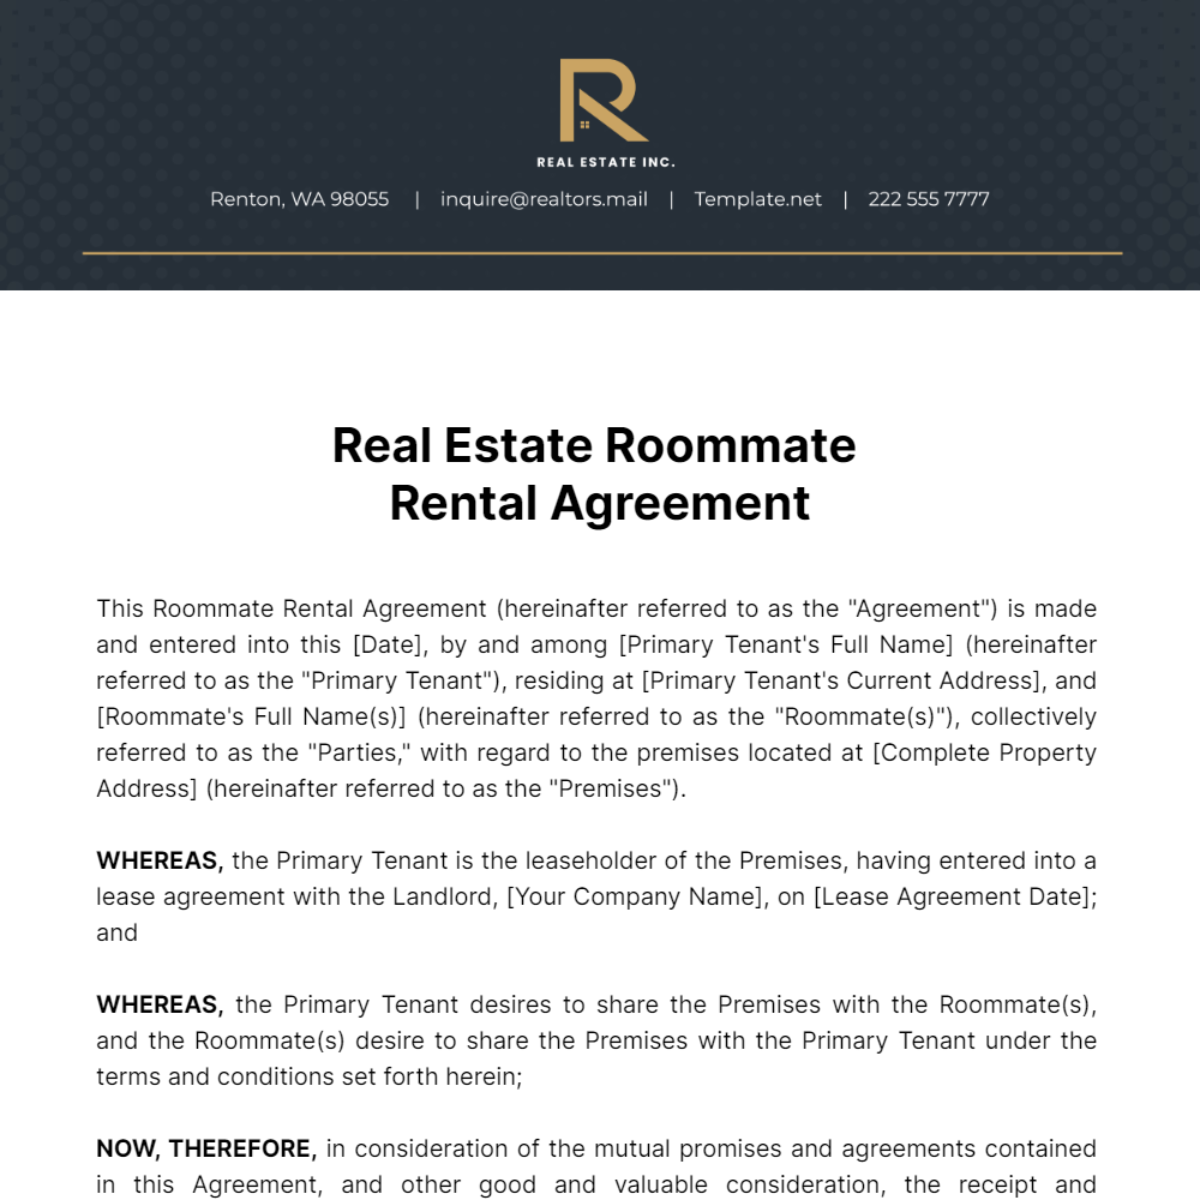 Free Real Estate Roommate Rental Agreement Template